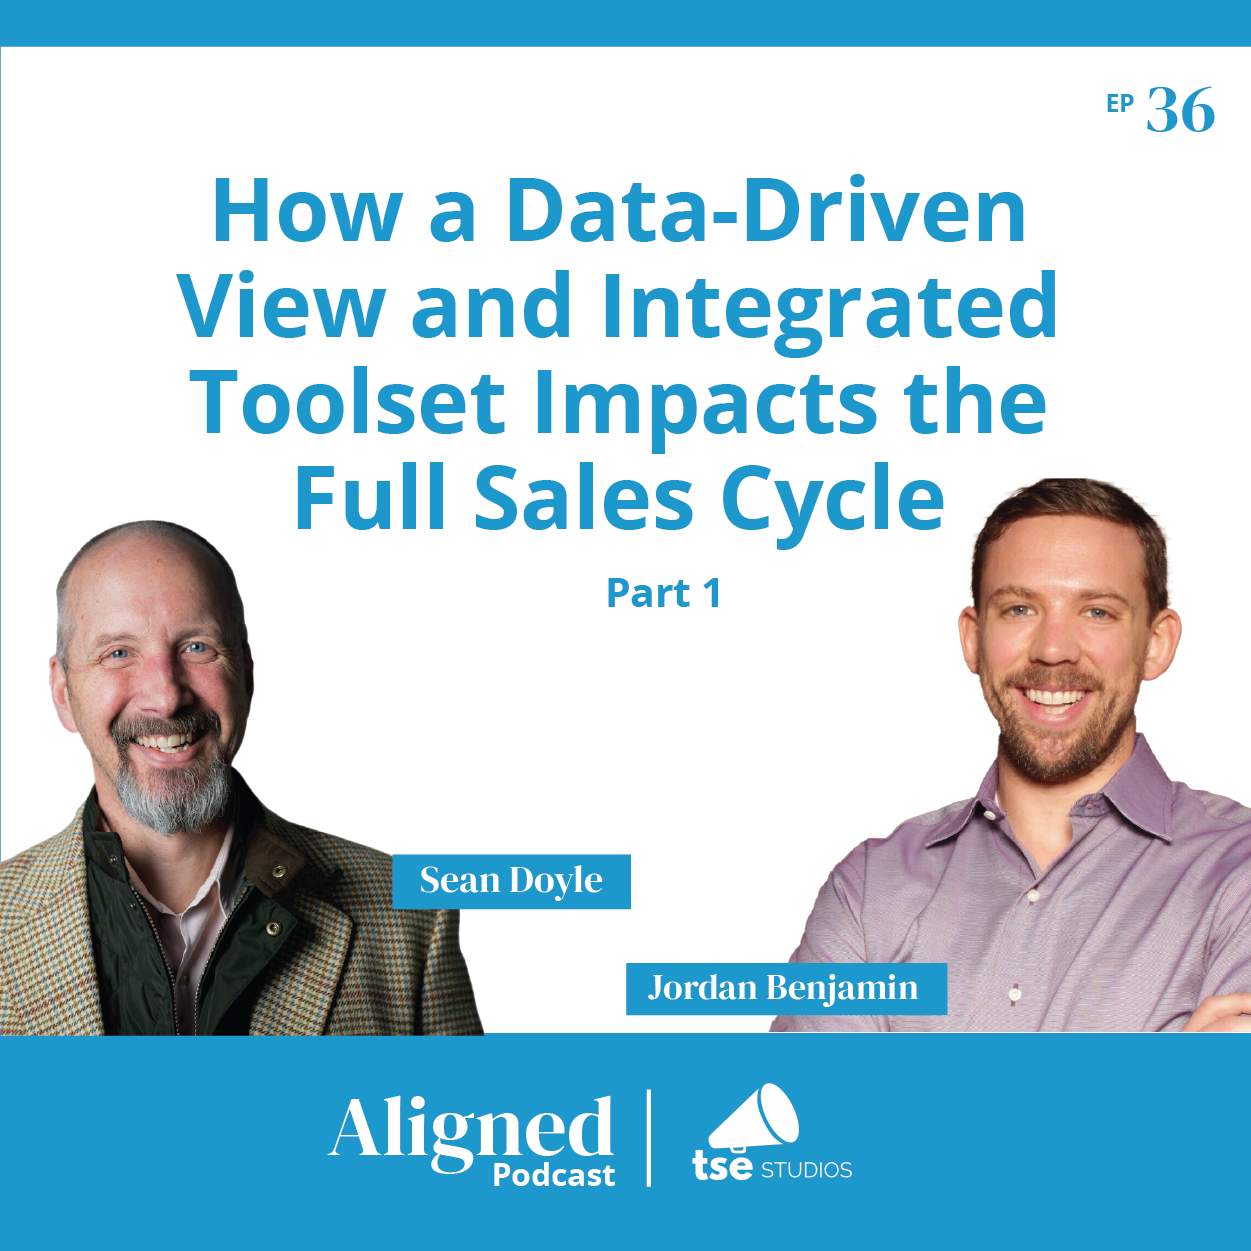 How a Data-Driven View and Integrated Toolset Impacts the Full Sales Cycle - Part 1